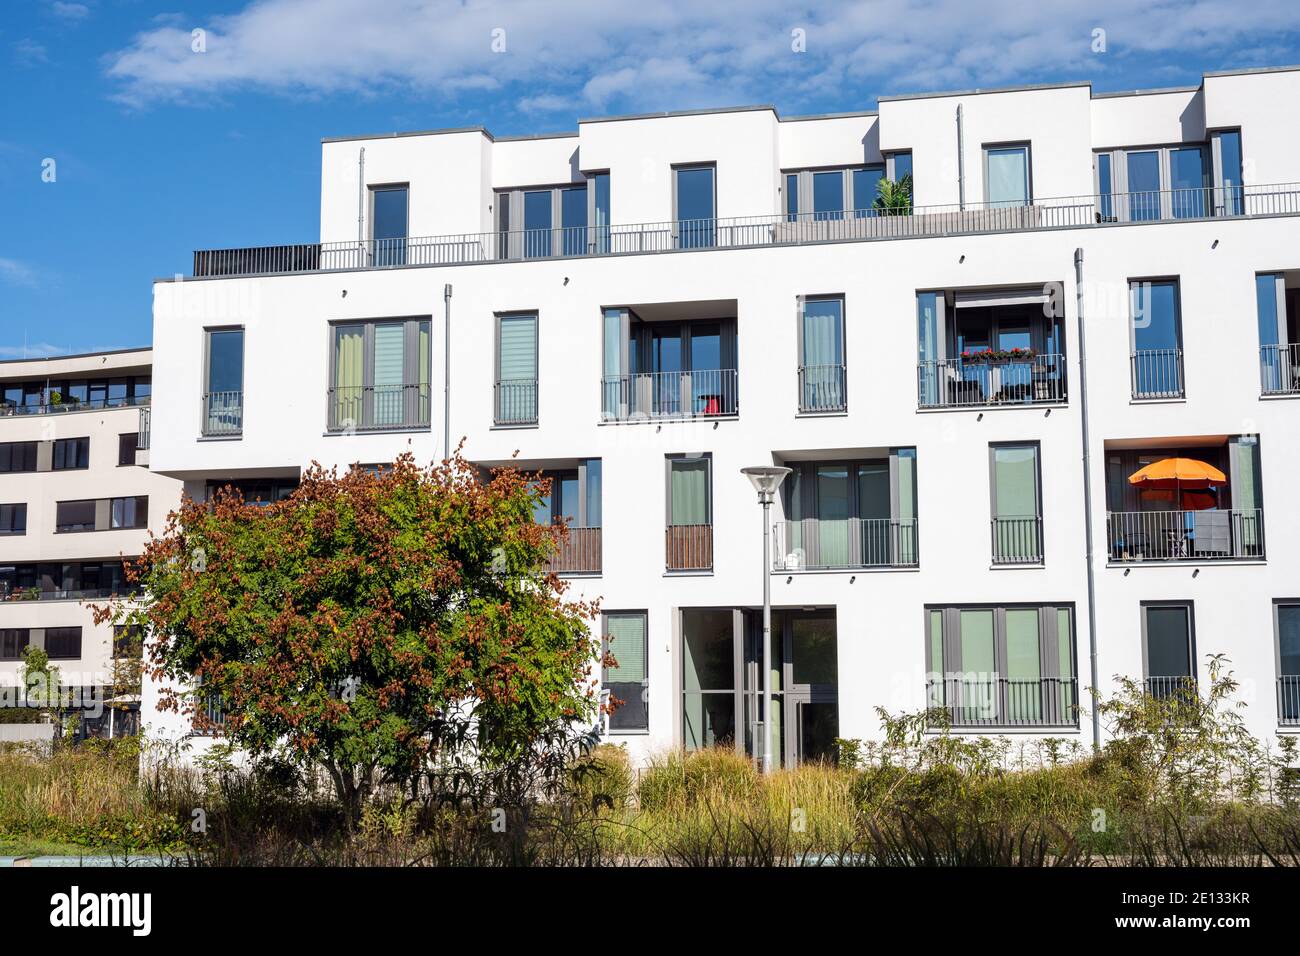 Modern serial apartment building seen in Berlin, Germany Stock Photo